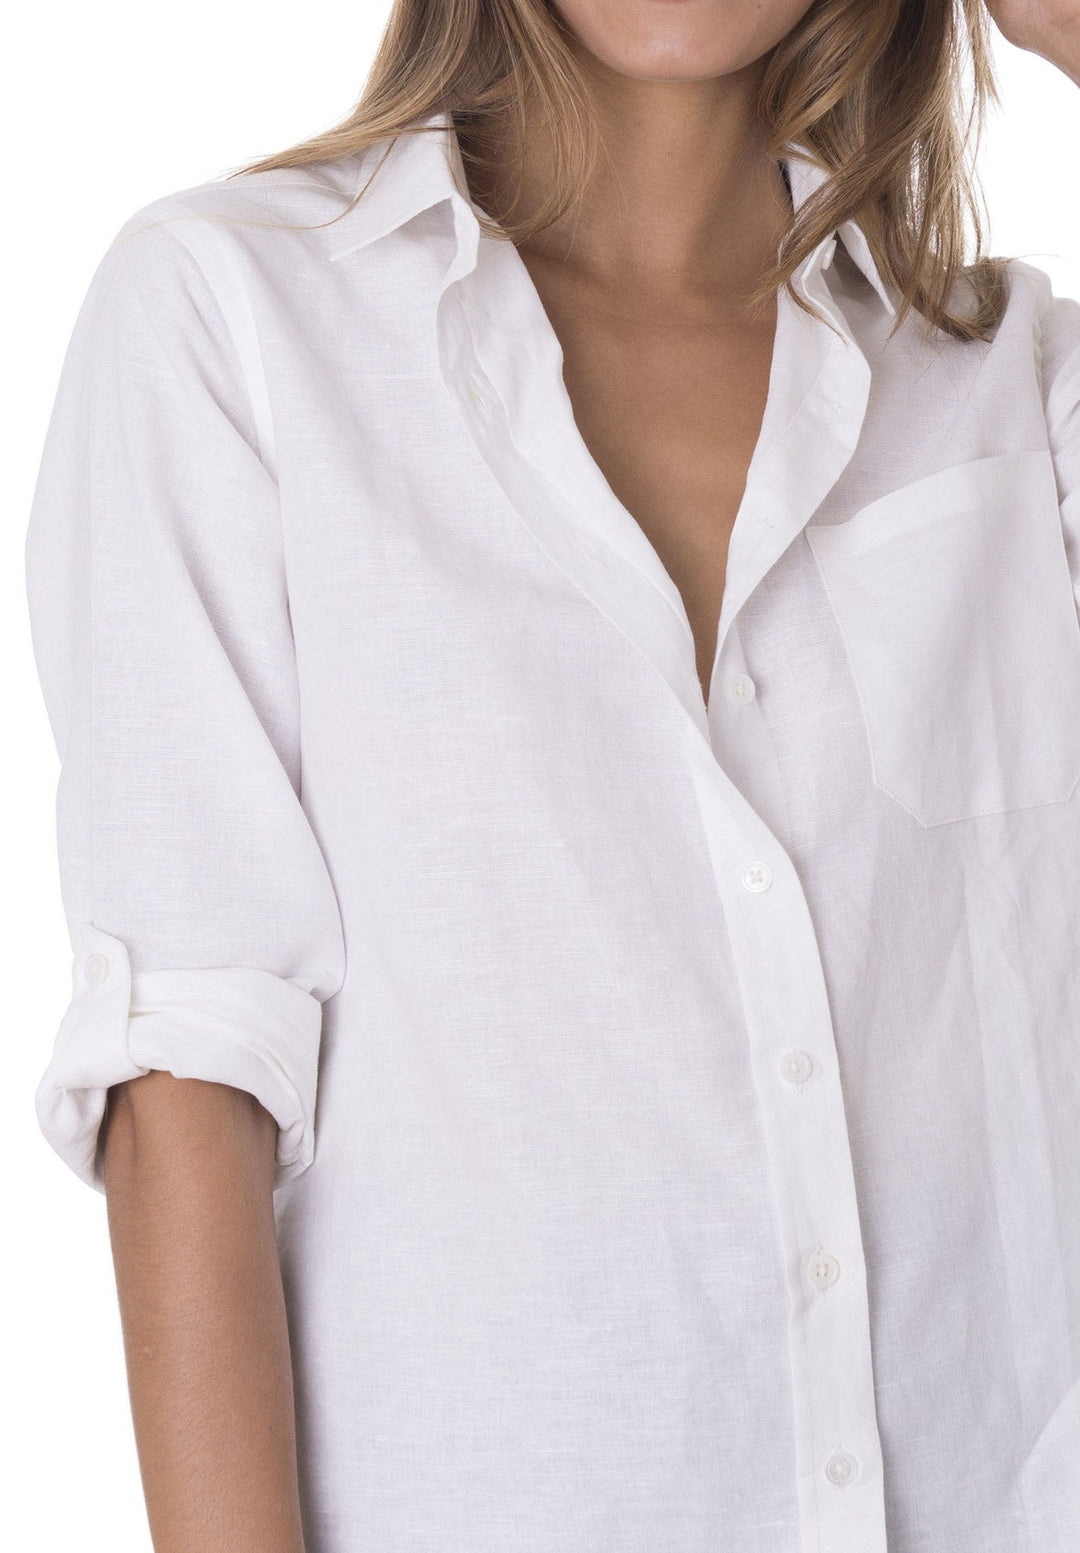 Febe-LS White linen shirt with roll-up tabs